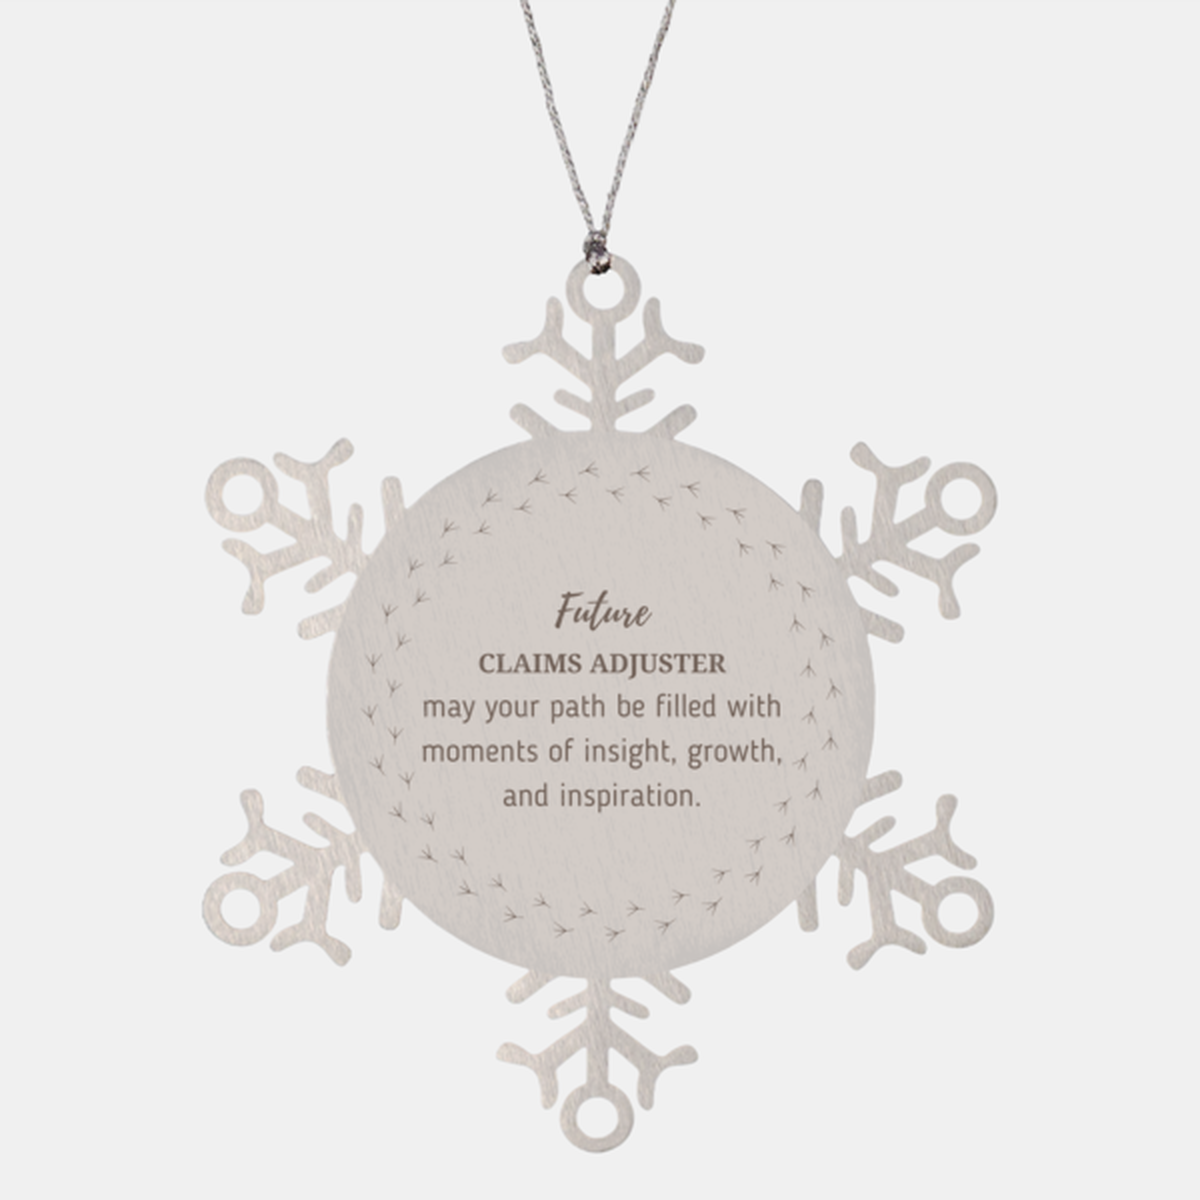 Future Claims Adjuster Gifts, May your path be filled with moments of insight, Graduation Gifts for New Claims Adjuster, Christmas Unique Snowflake Ornament For Men, Women, Friends